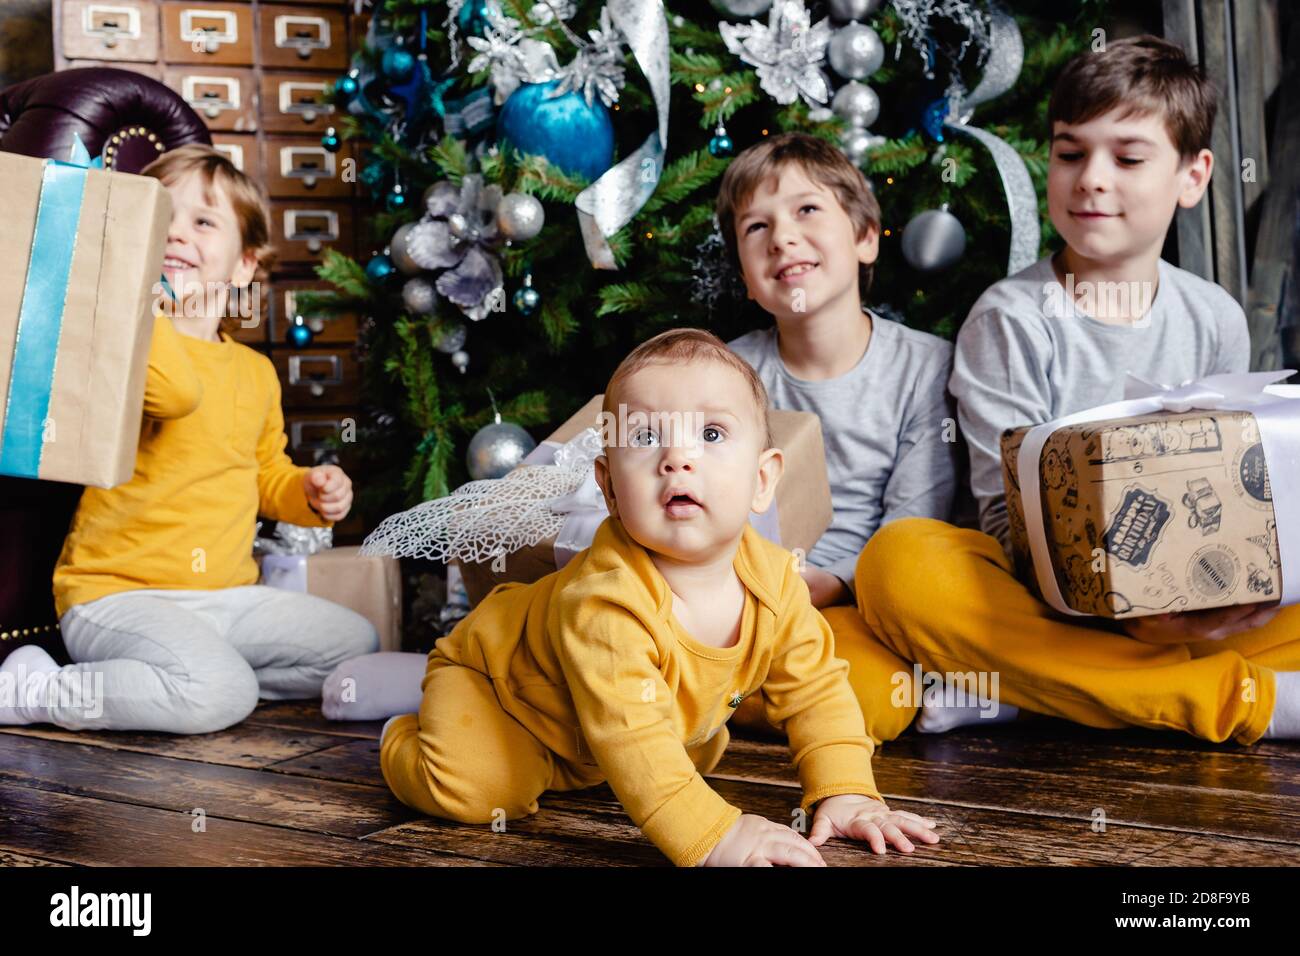 Happy children brothers opening gifts in front of Christmas tree. Christmas time. Focus on baby. Stock Photo